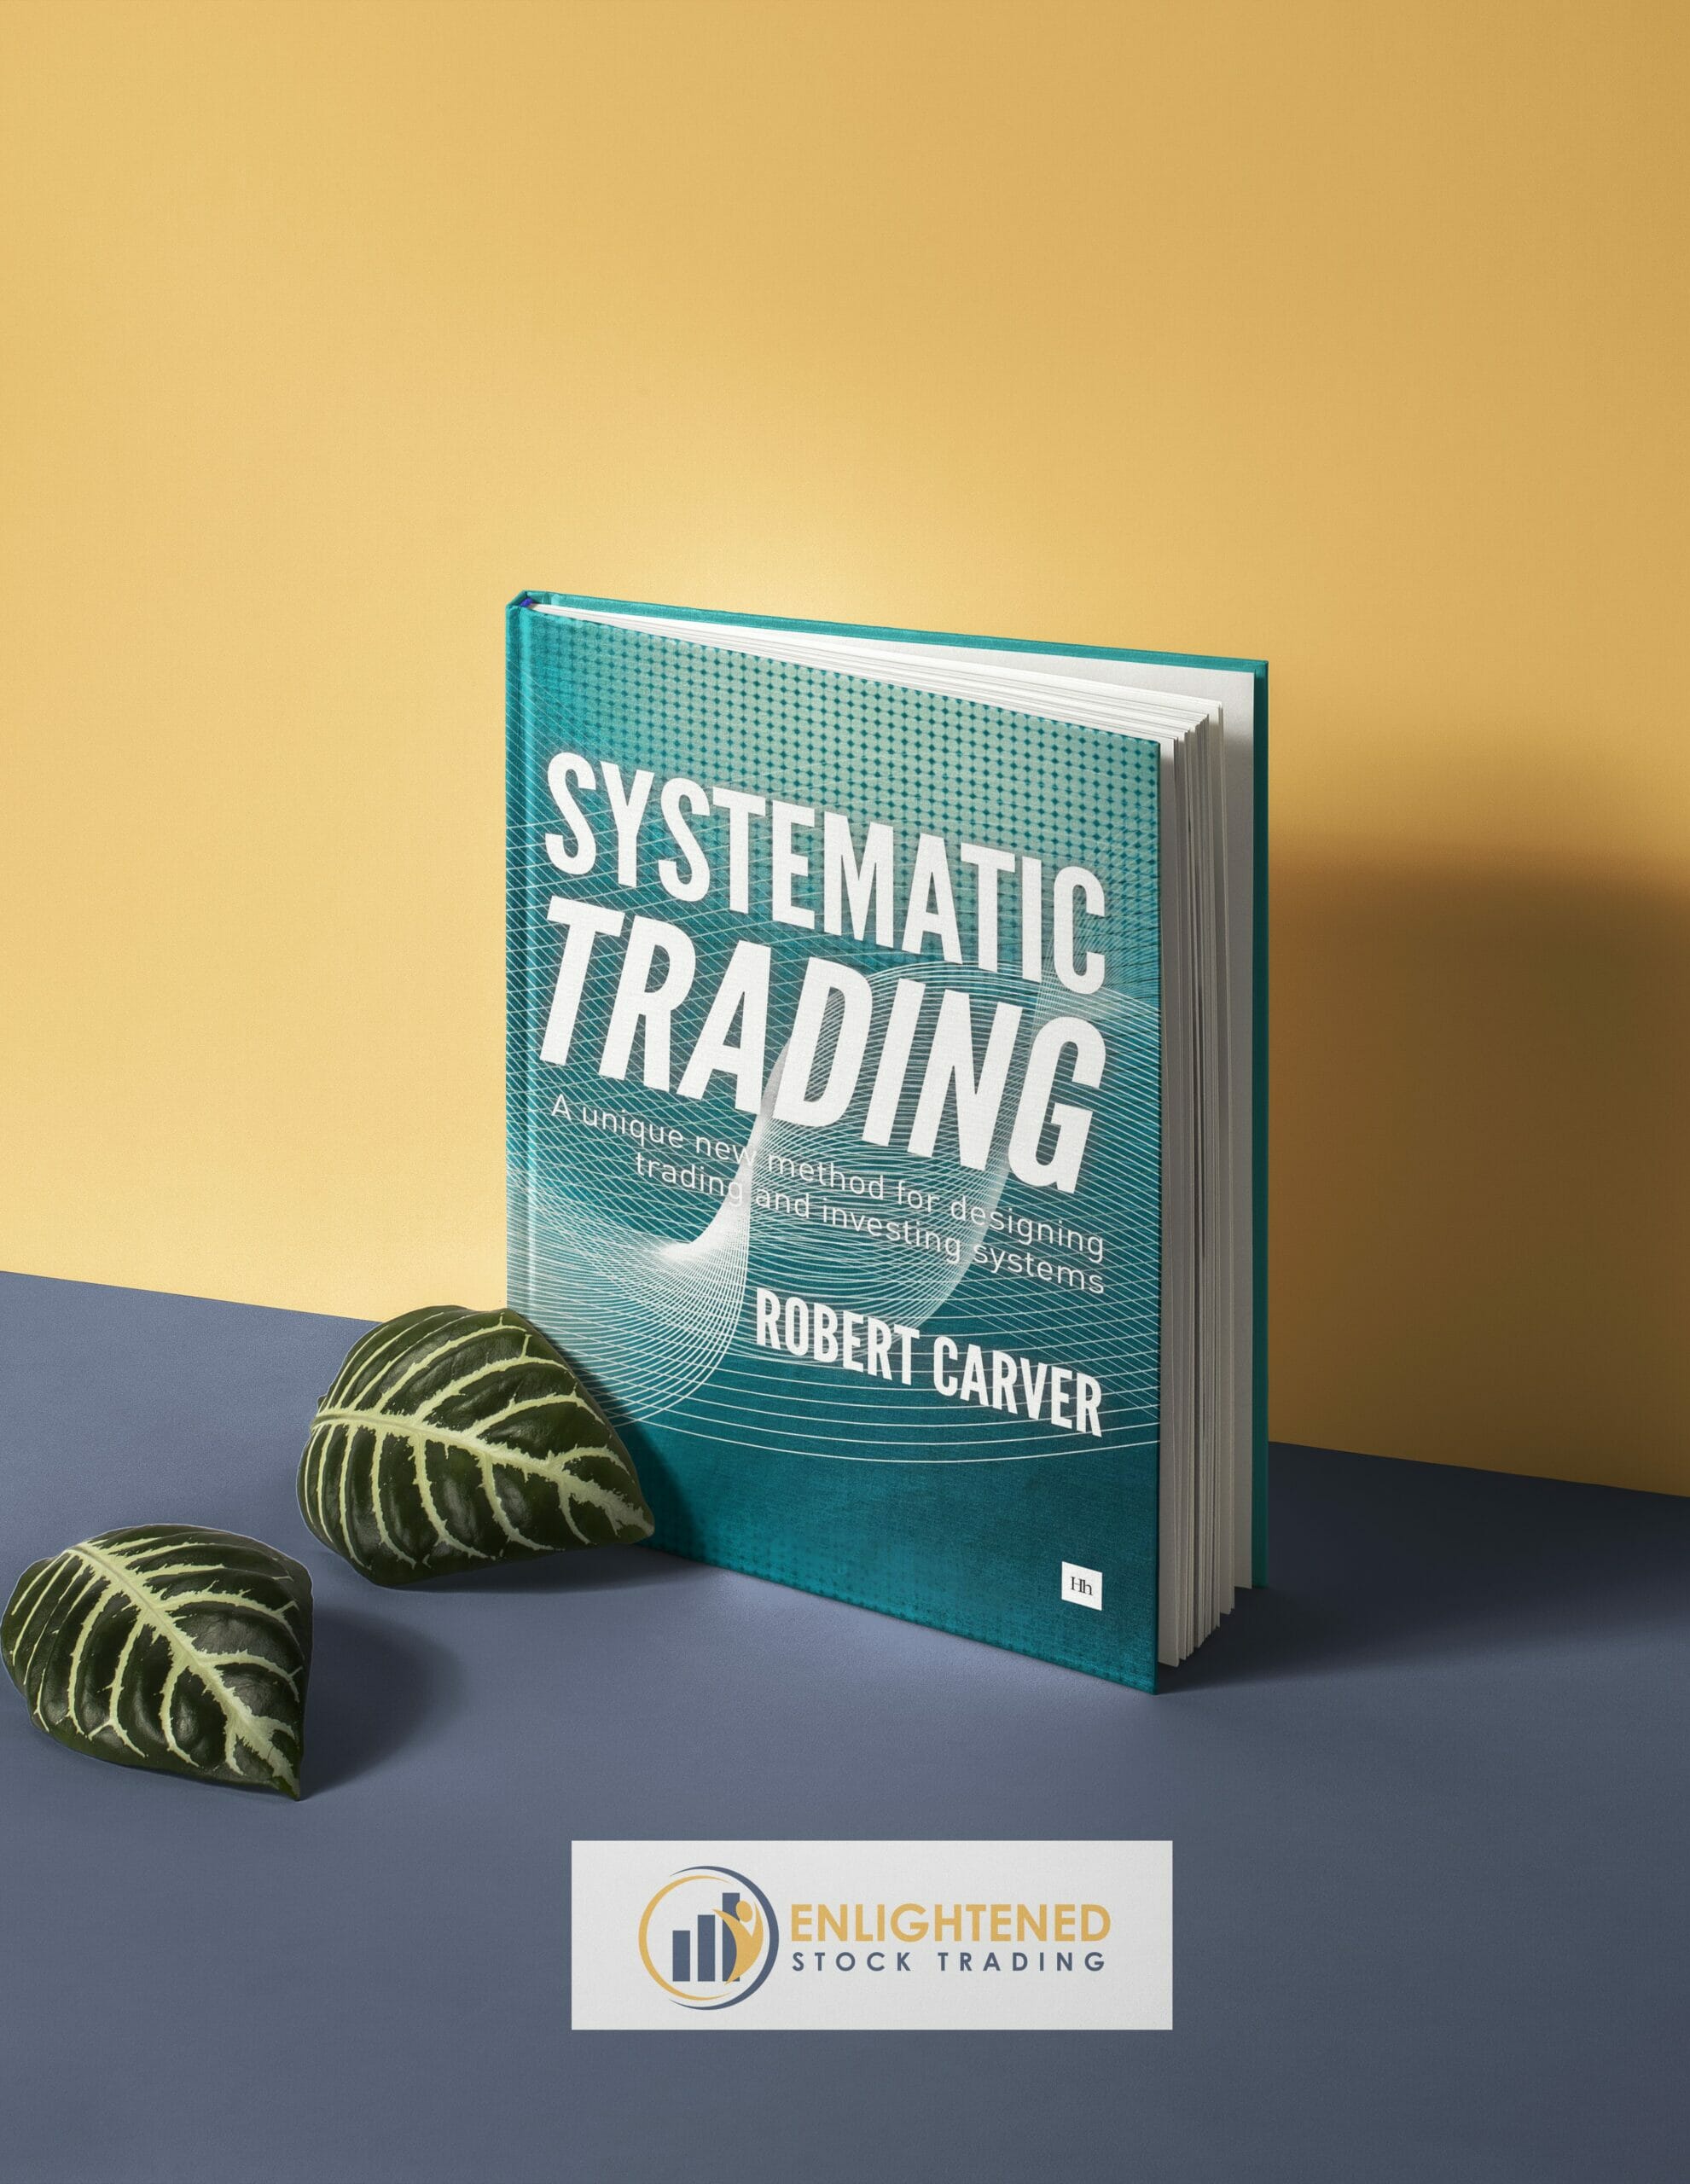 Robert carver - systematic trading